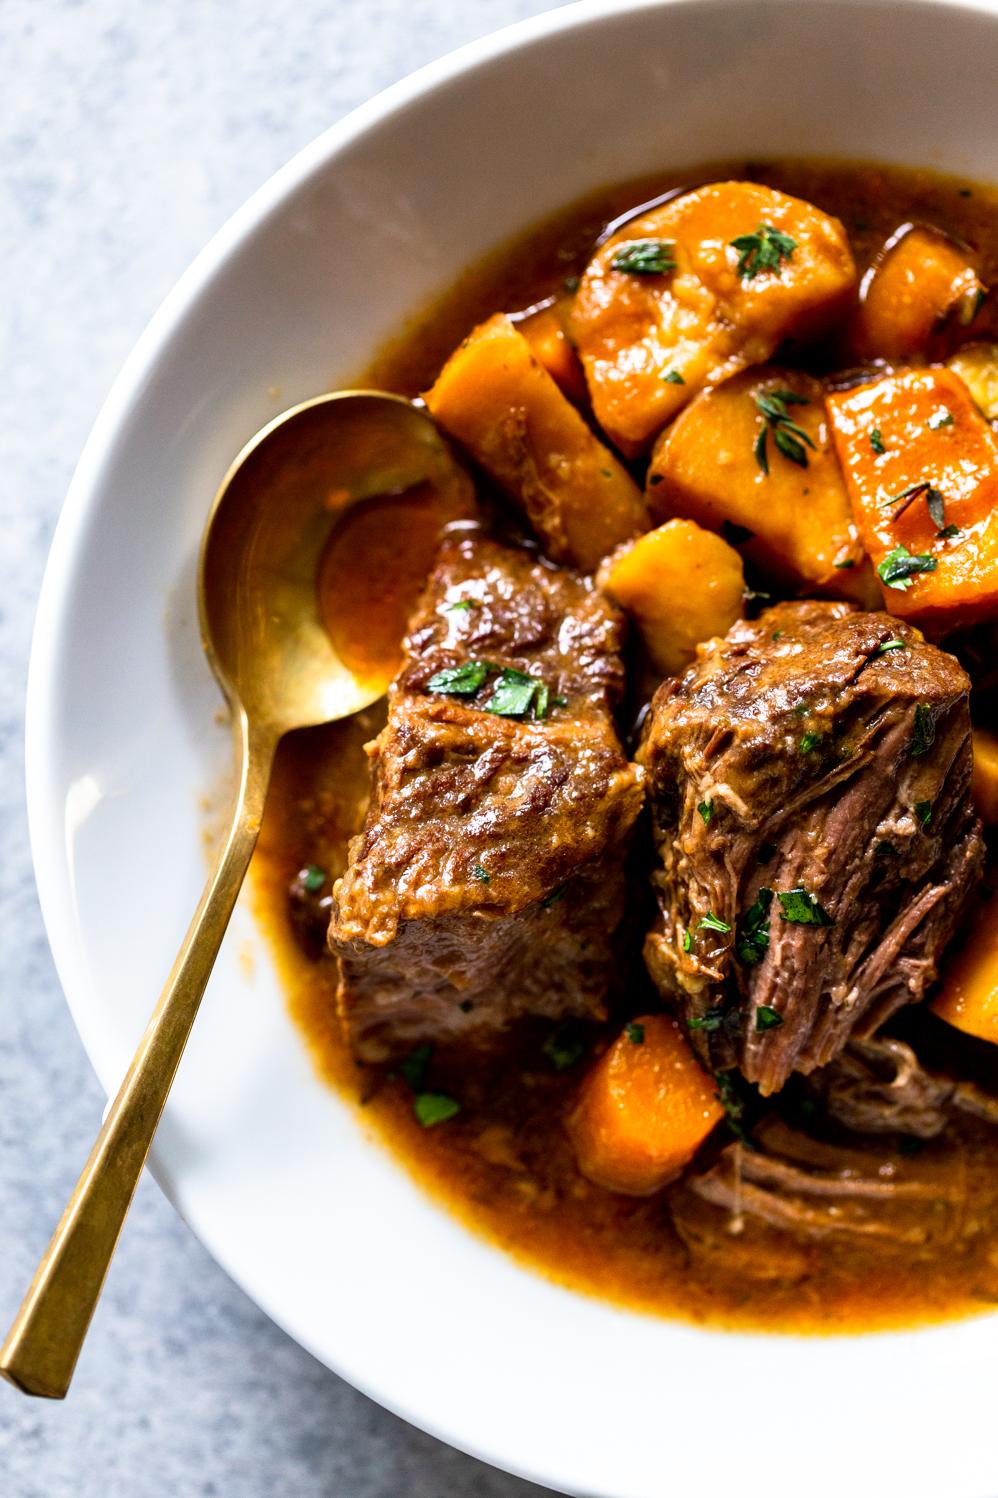 Delicious Slow Cooker Irish Stew: A Comforting Winter Meal